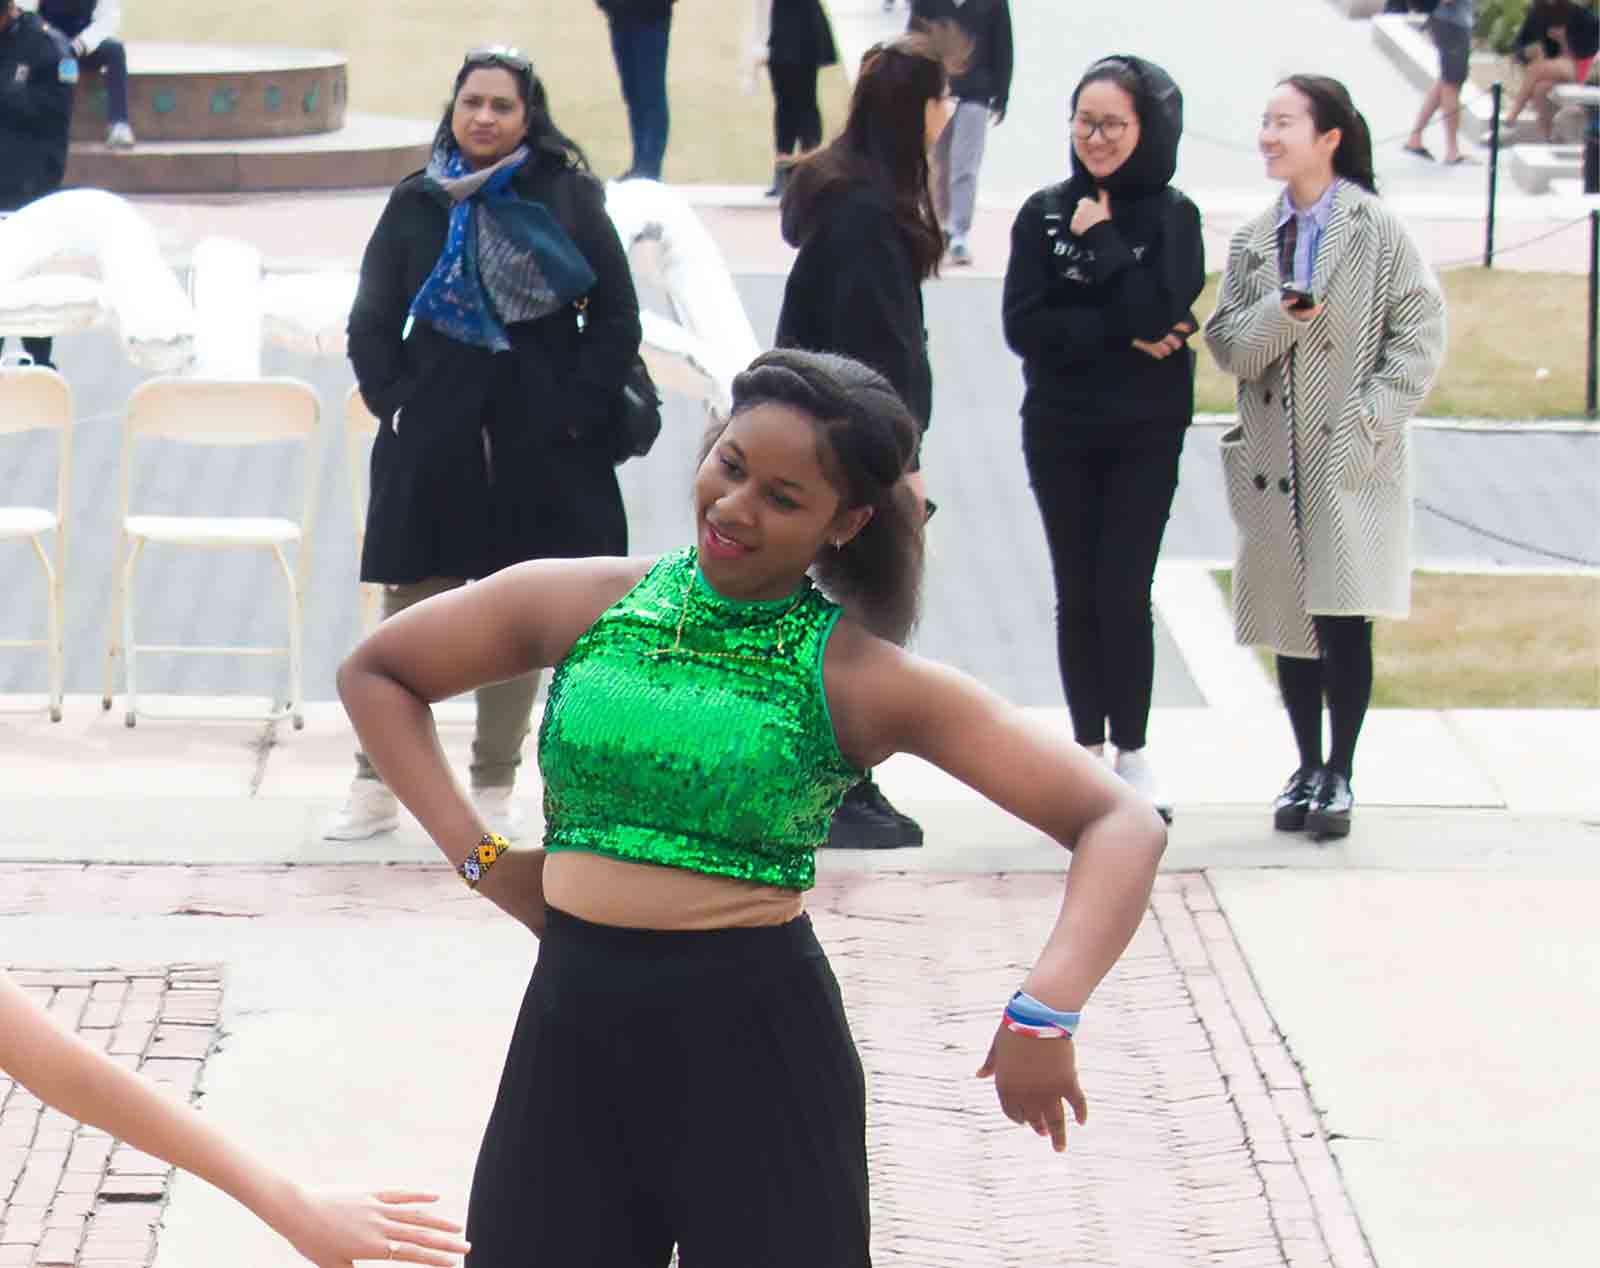 Young woman dancing wearing sequined green top